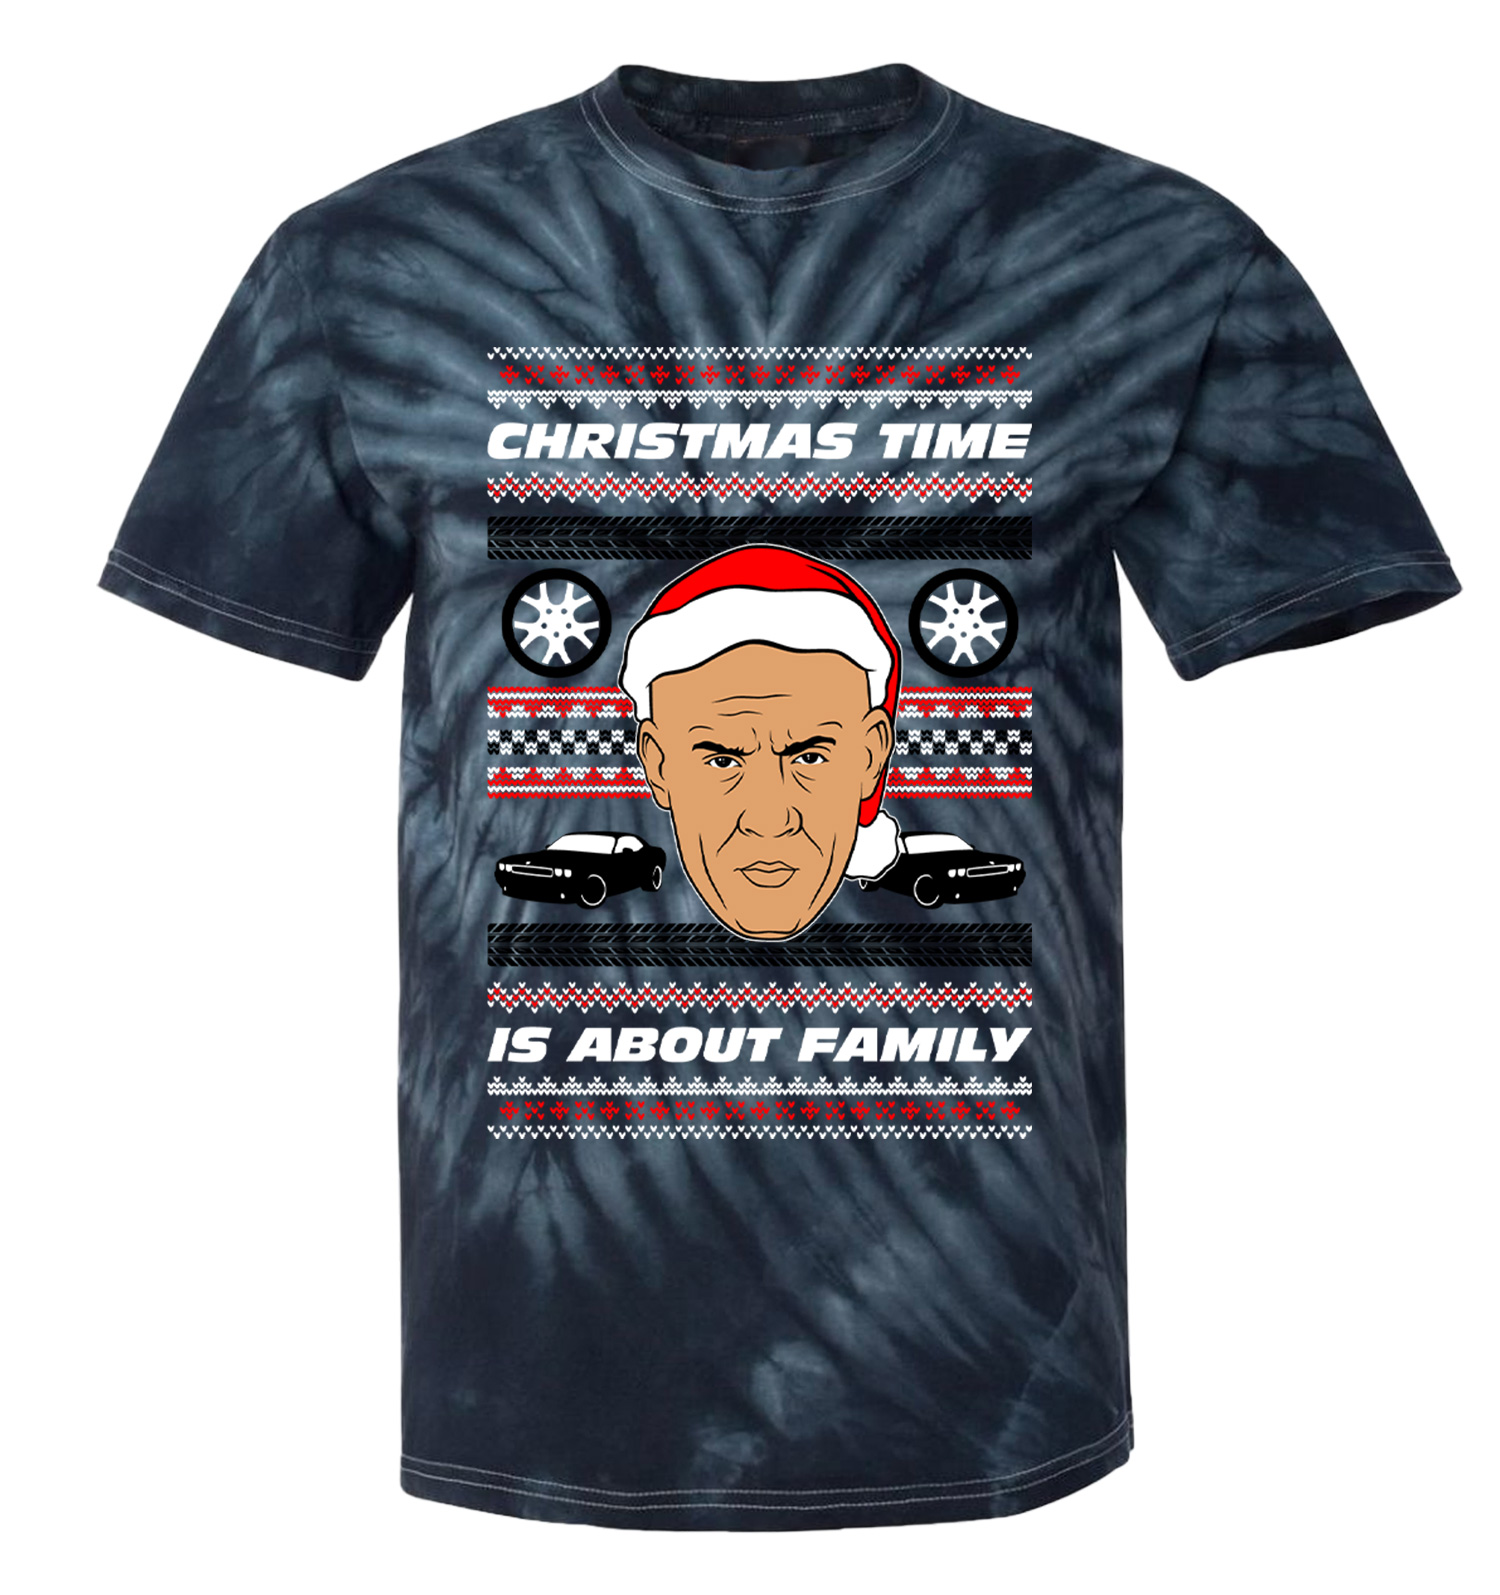 äußern Christmas Time Is About | Dom Family Furious T-shirt eBay Toretto Men\'s 